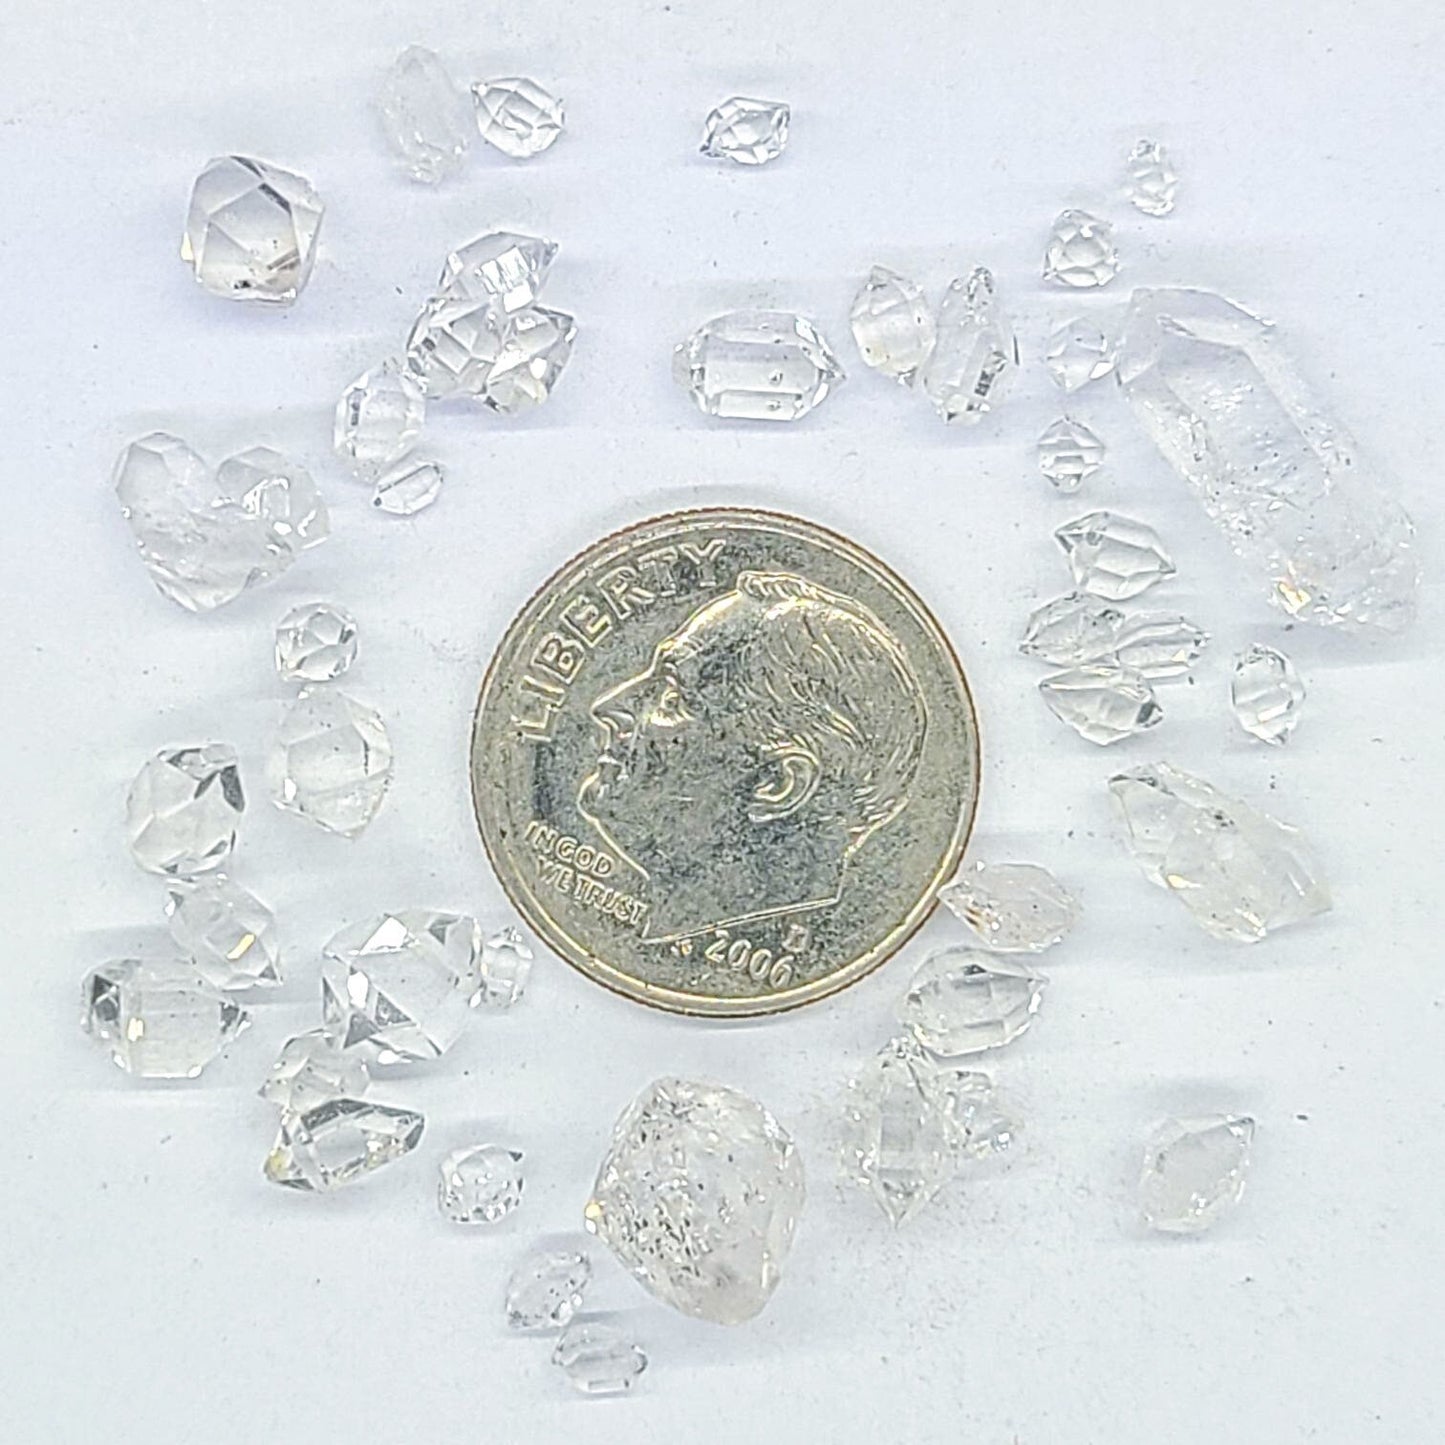 Herkimer Diamonds, AAA Quality Precious and Semi Precious Mini Gemstones, Top Quality Crystals, Minerals, Stones, Crystal Grids